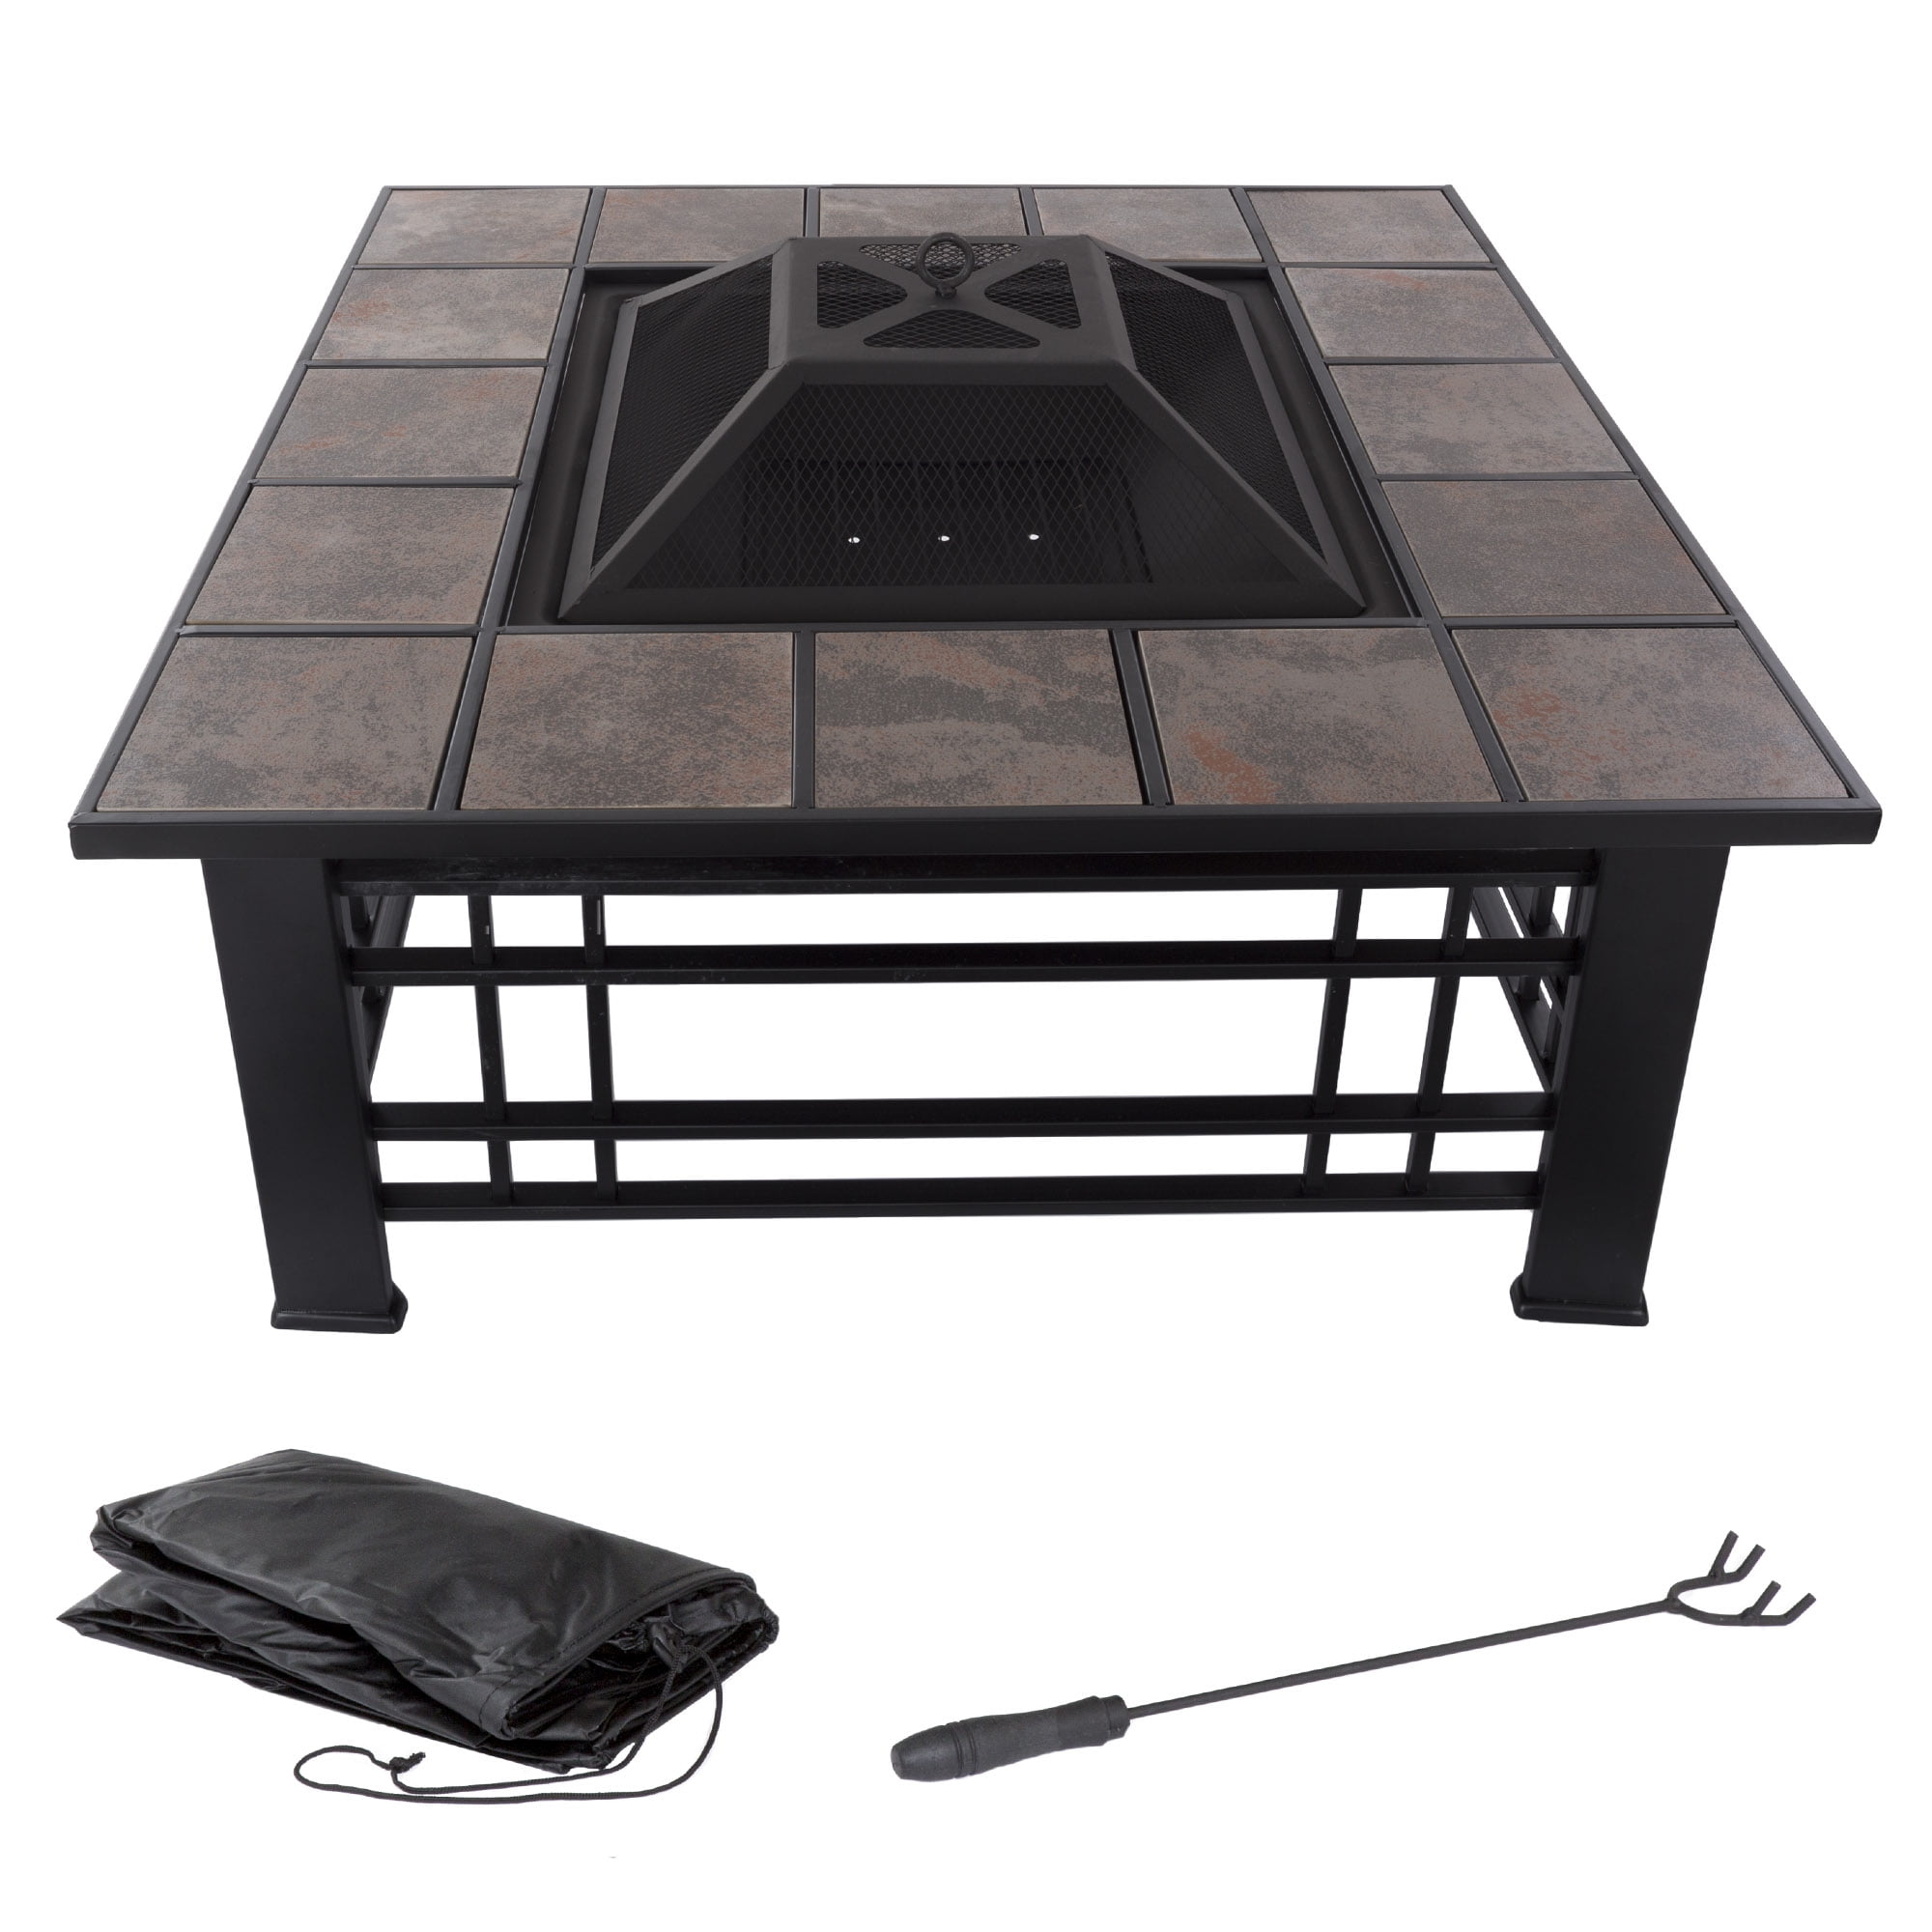 Square Tile Firepit By Pure Garden, Outdoor Fire Pit Tiles